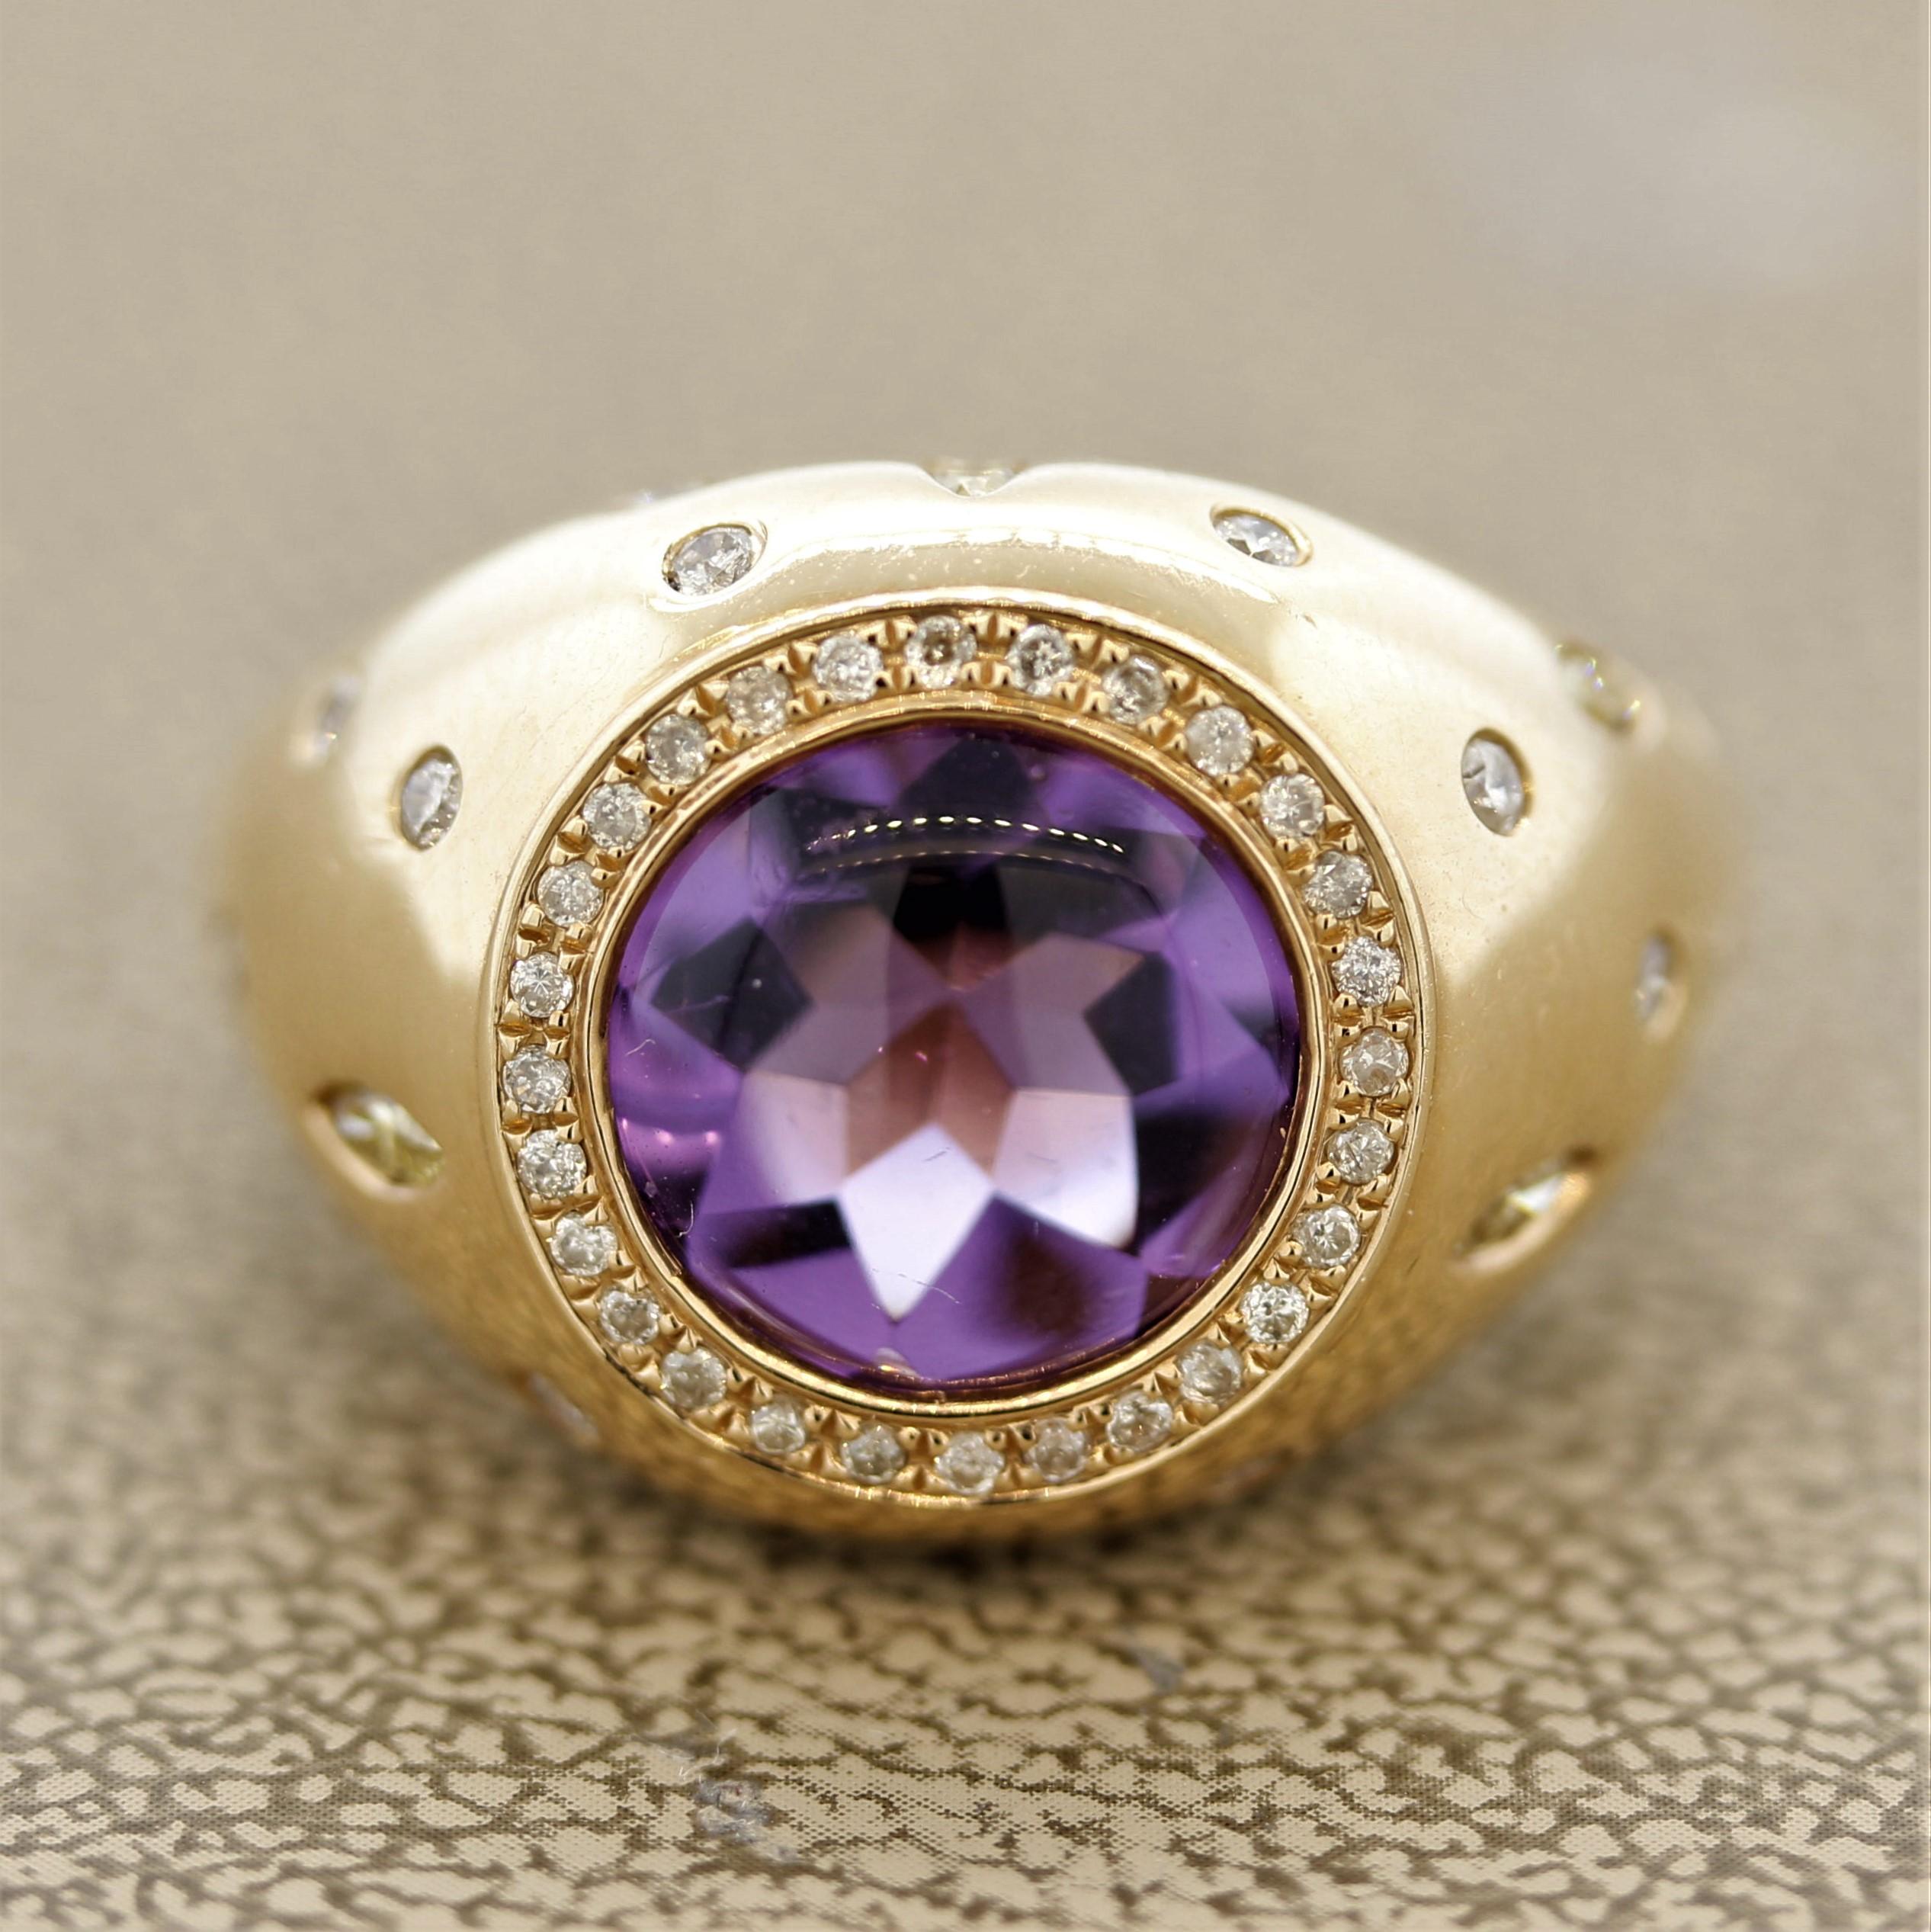 A modern designed ring featuring a 3.70 carat amethyst that has a cabochon top and faceted bottom for a unique look. It is accented by 0.74 carats of diamond which halo the amethyst and are set on the sides of the ring. Made in 18k rose gold and